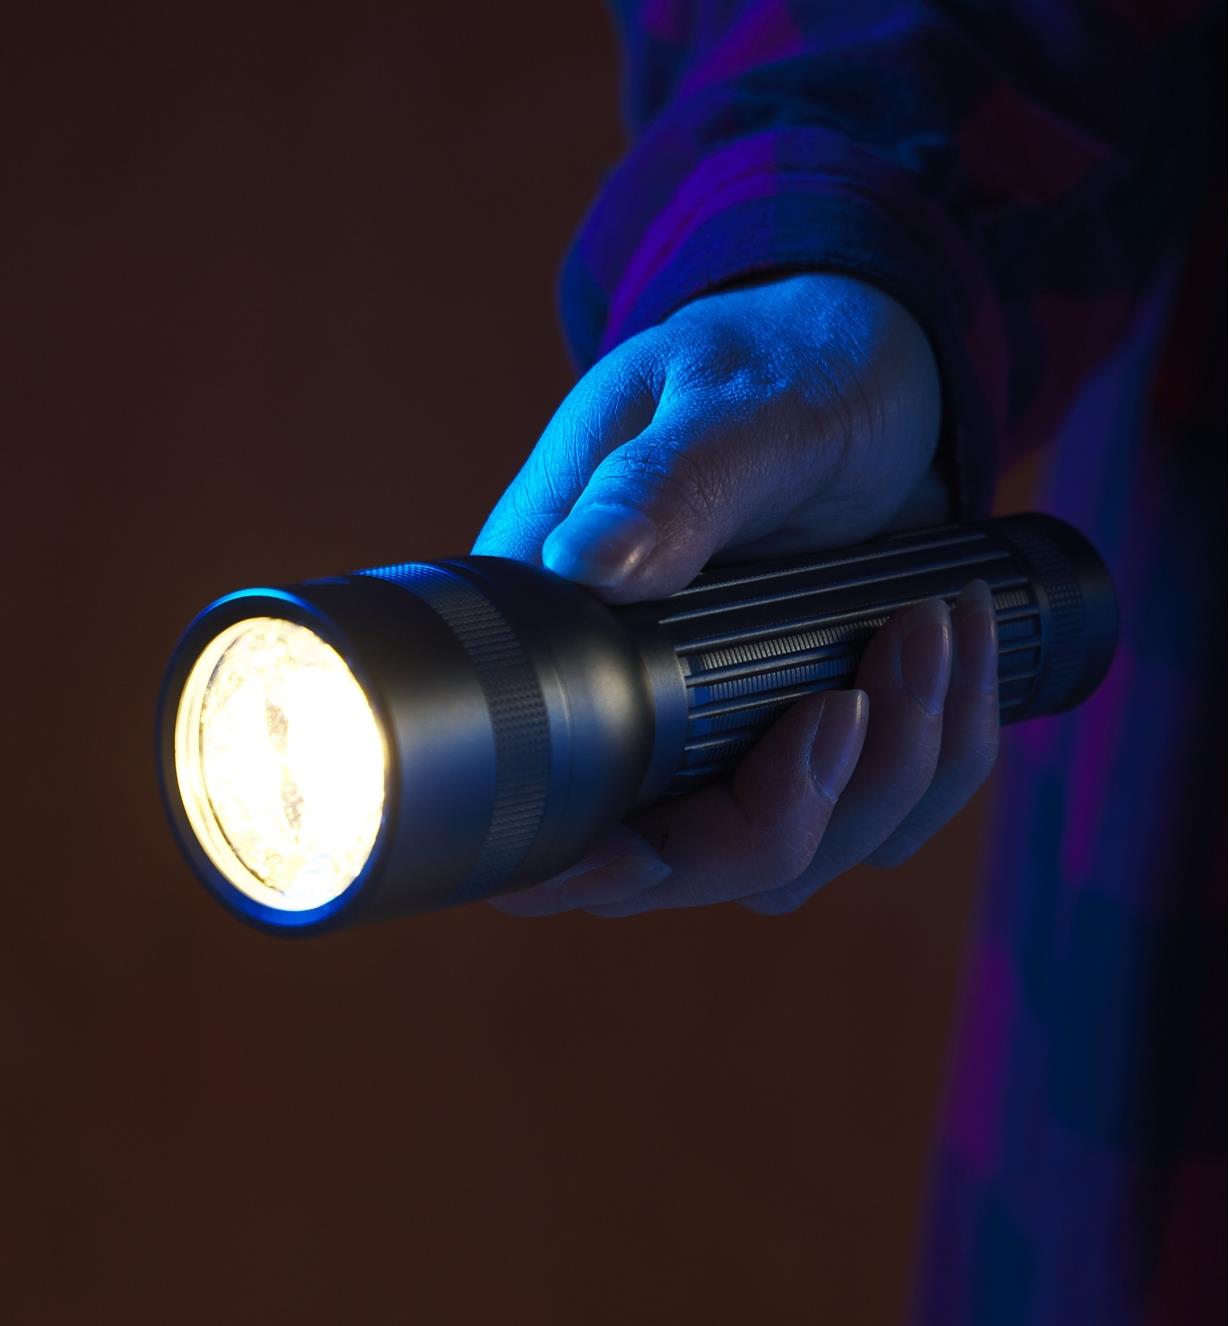 A person is holding a bright flashlight